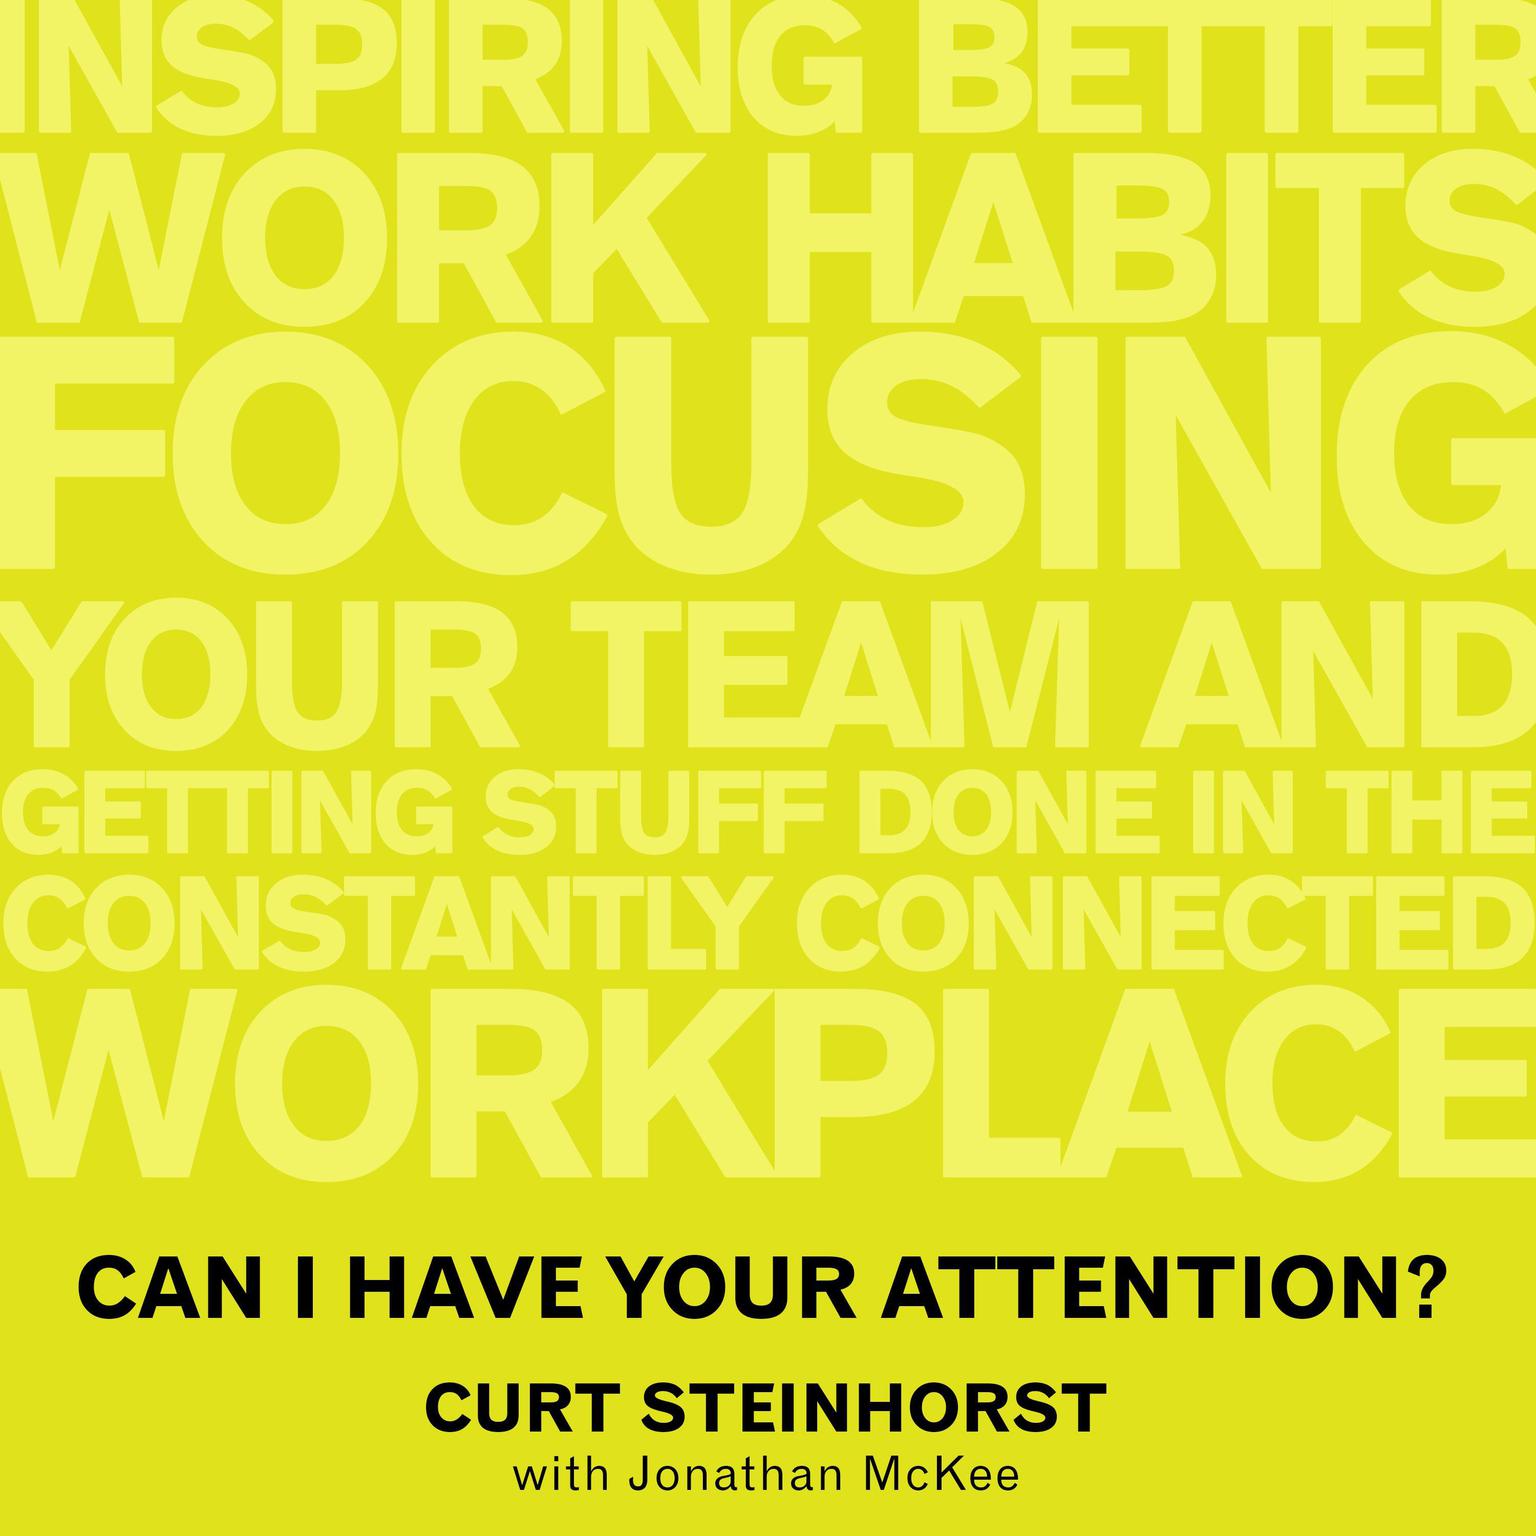 Can I Have Your Attention?: Inspiring Better Work Habits, Focusing Your Team, and Getting Stuff Done in the Constantly Connected Workplace Audiobook, by Curt Steinhorst